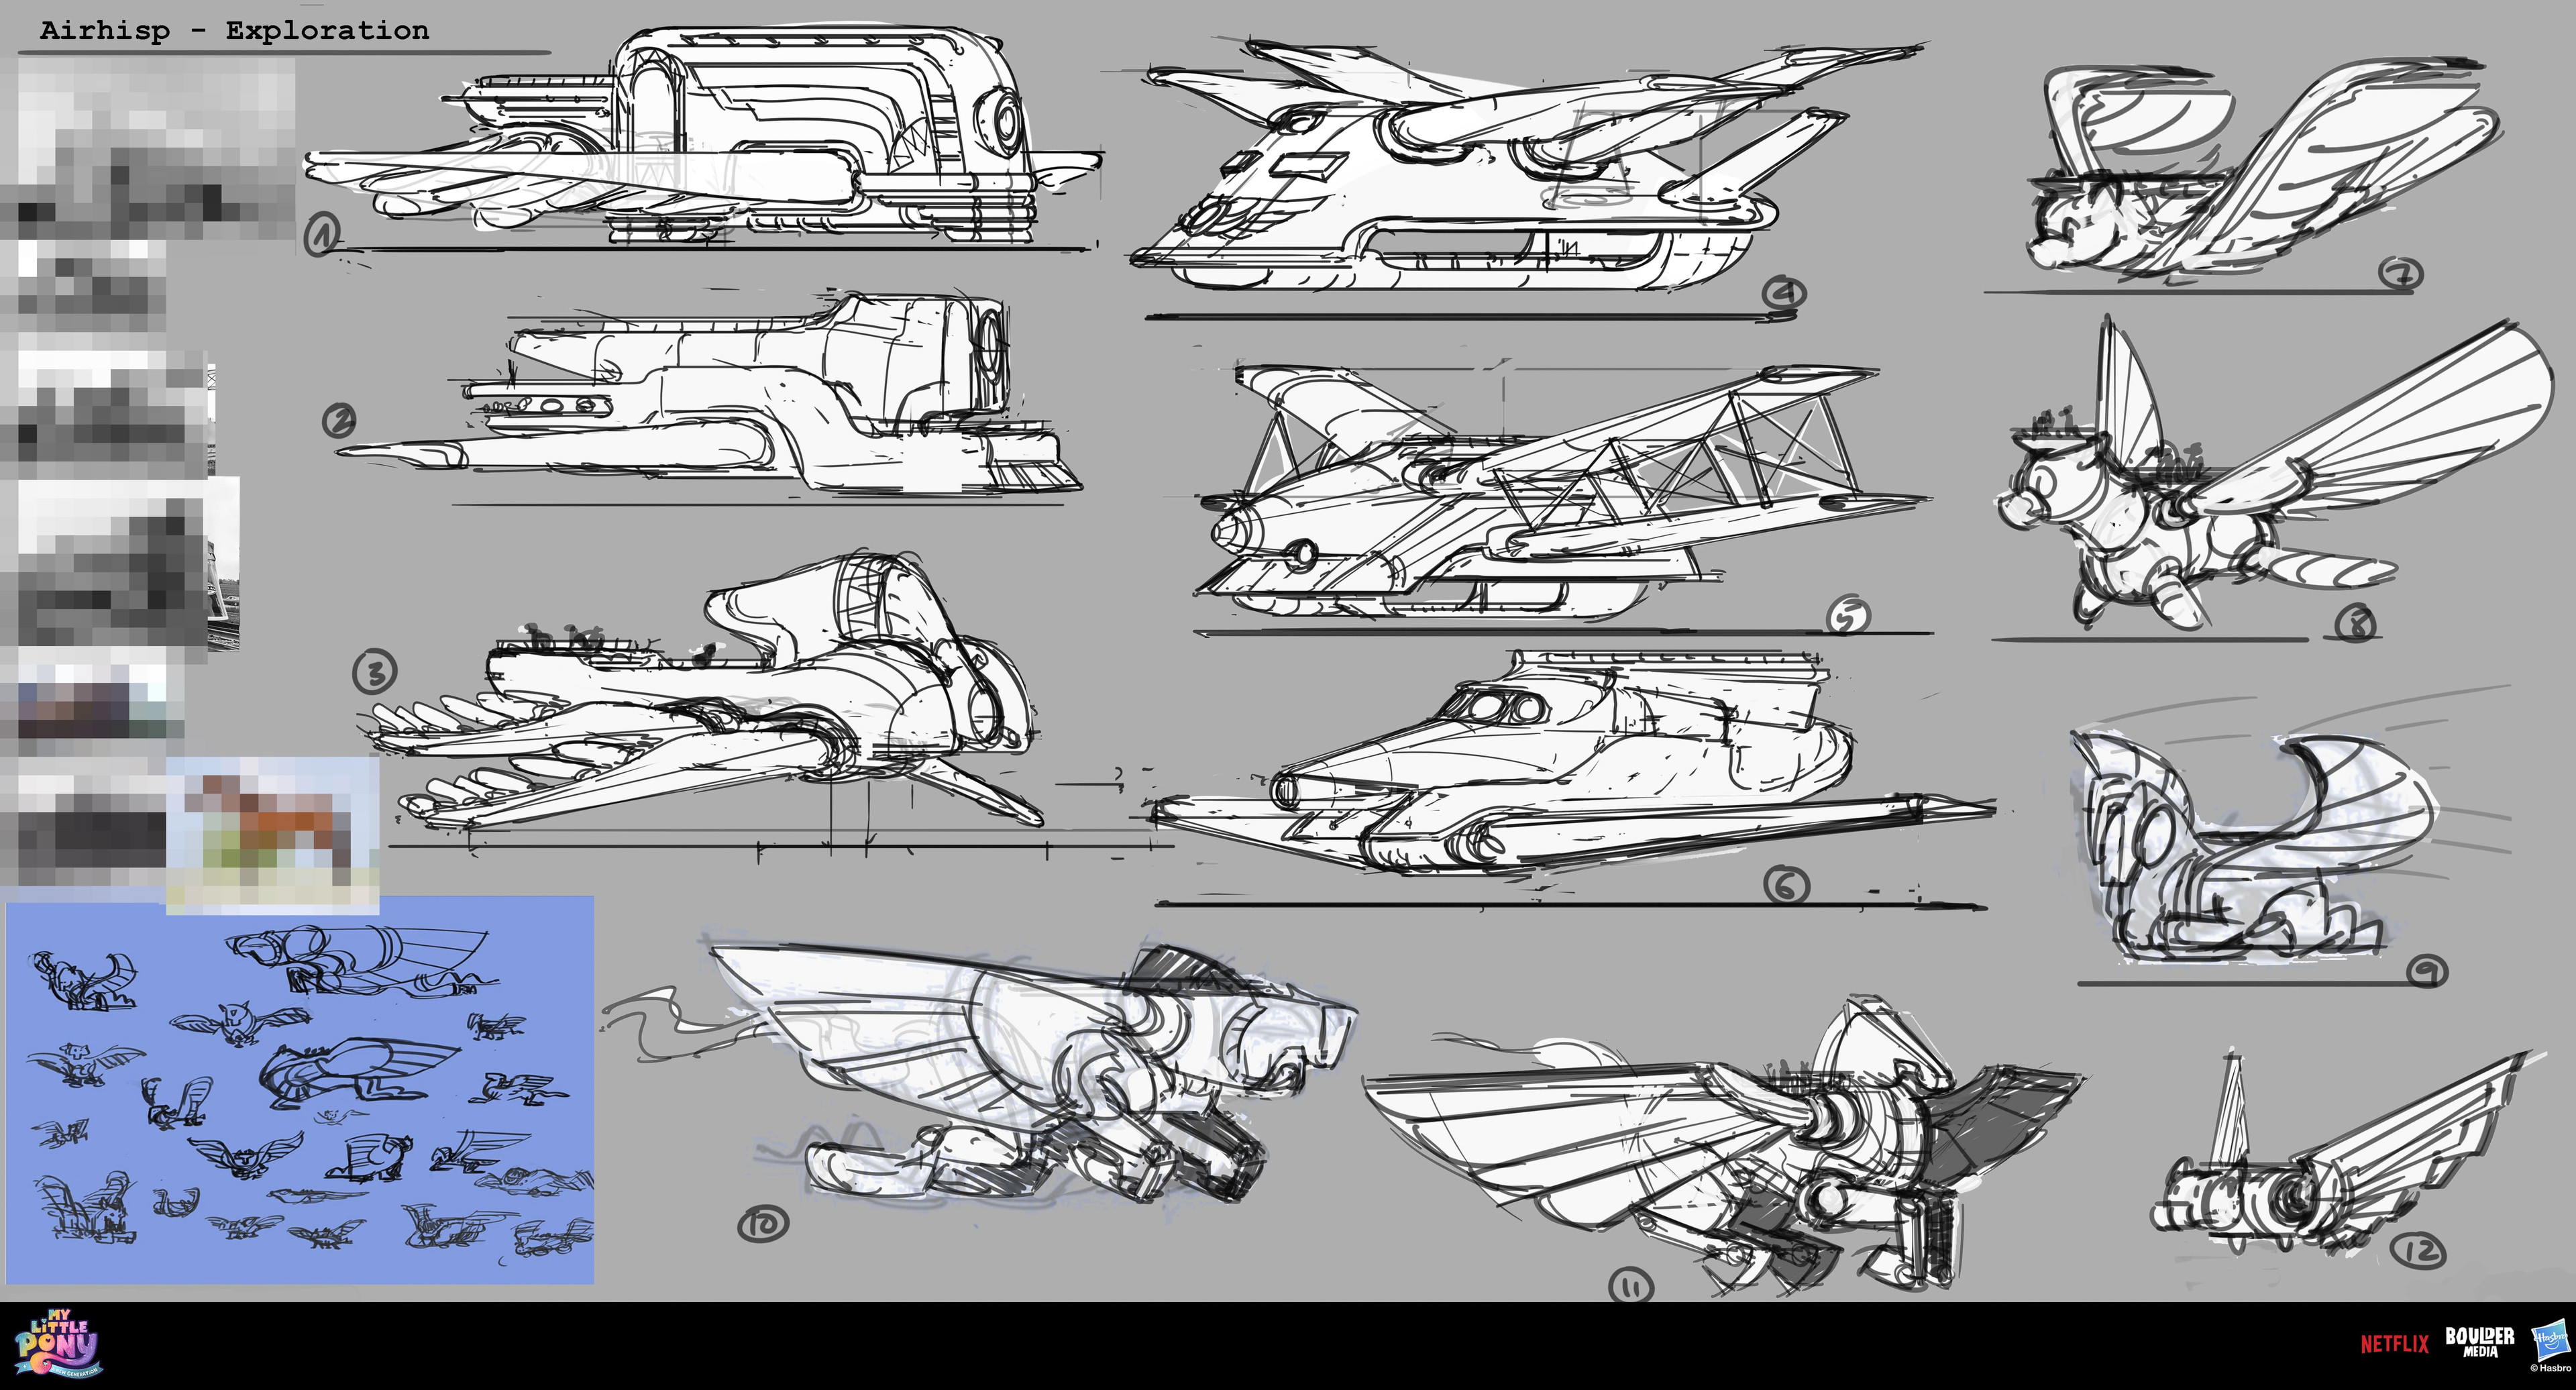 More flying ship exploration